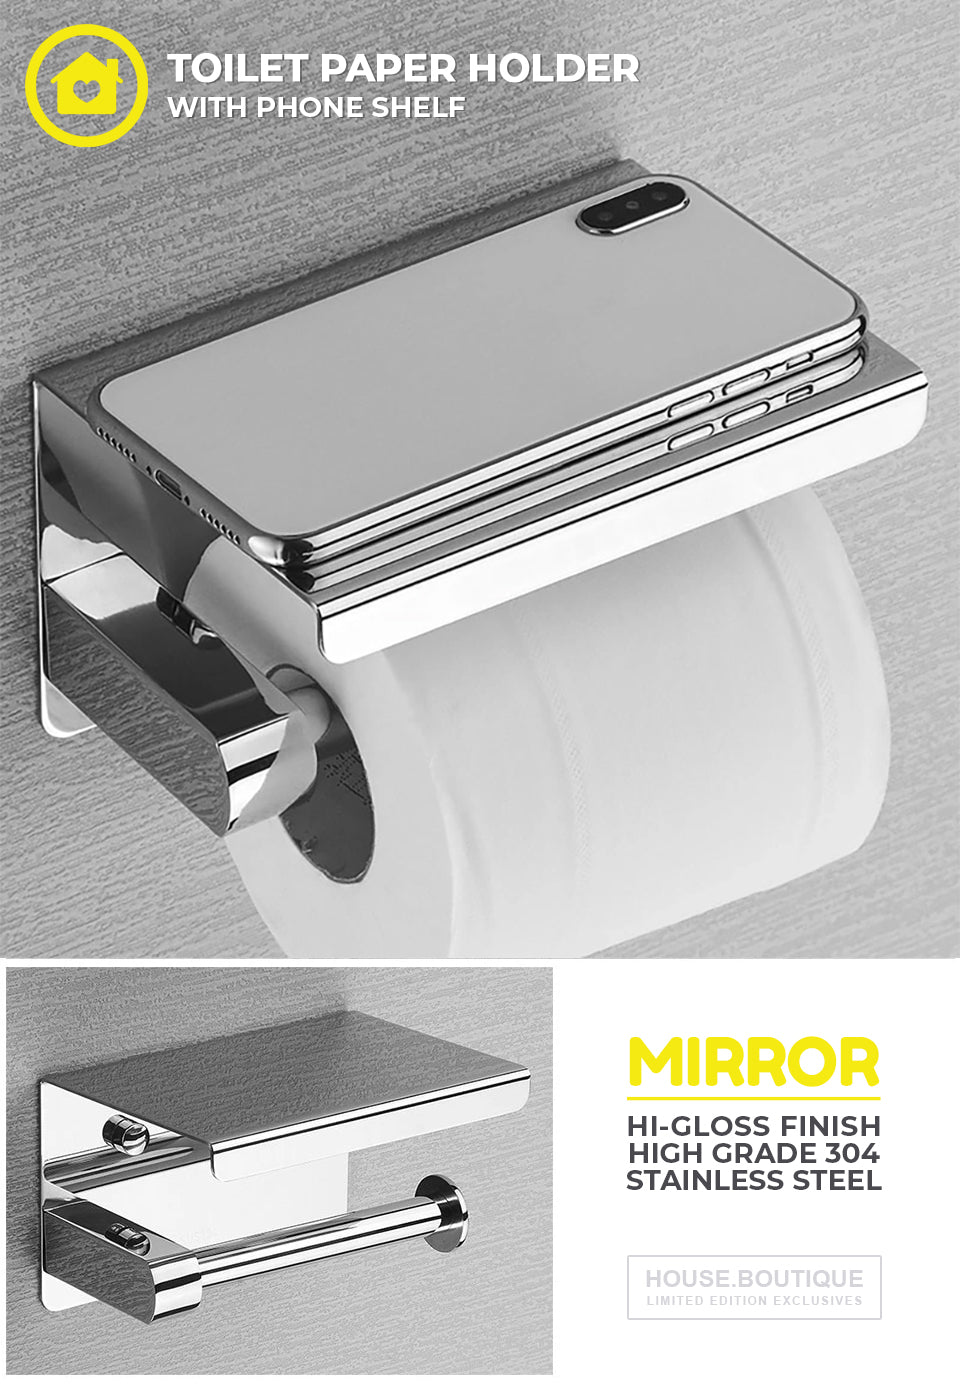 High Gloss Stainless Steel Toilet Roll Holder With Handy Phone Shelf Luxury Premium Accessories And Fittings Modern Washroom Bathroom Silver Loo Roll Holder